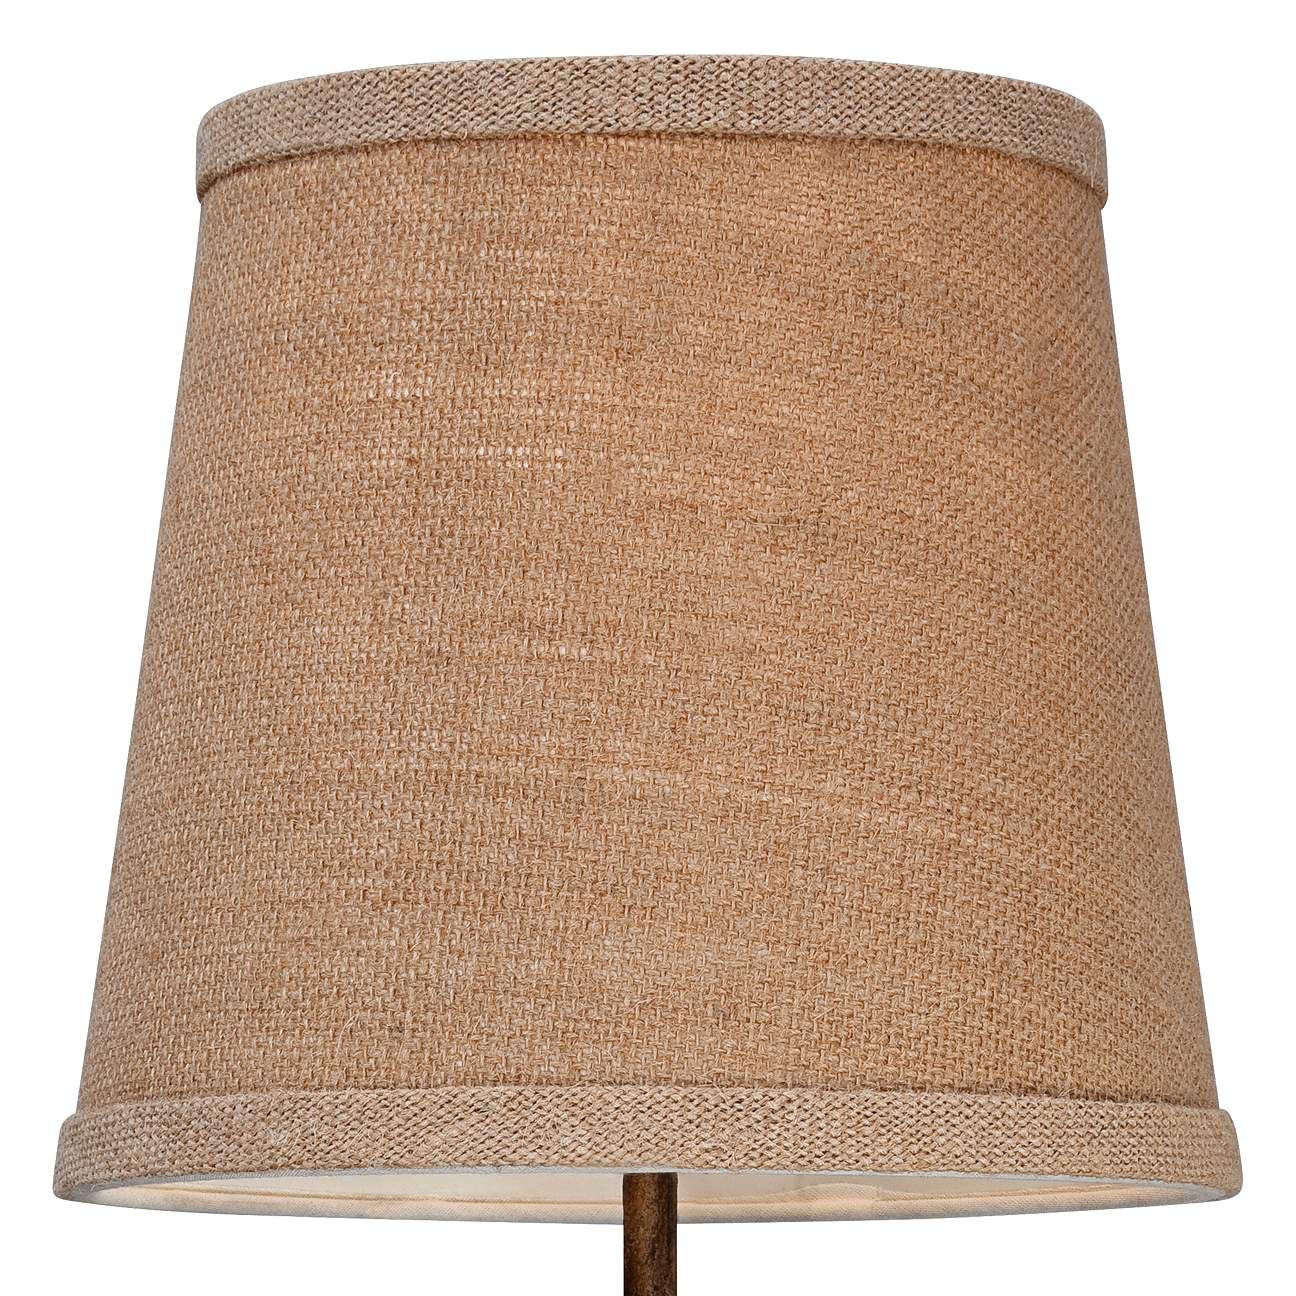 Bird Moderne Crackle Finish 15 1/2" High Small Accent Lamp | Lamps Plus